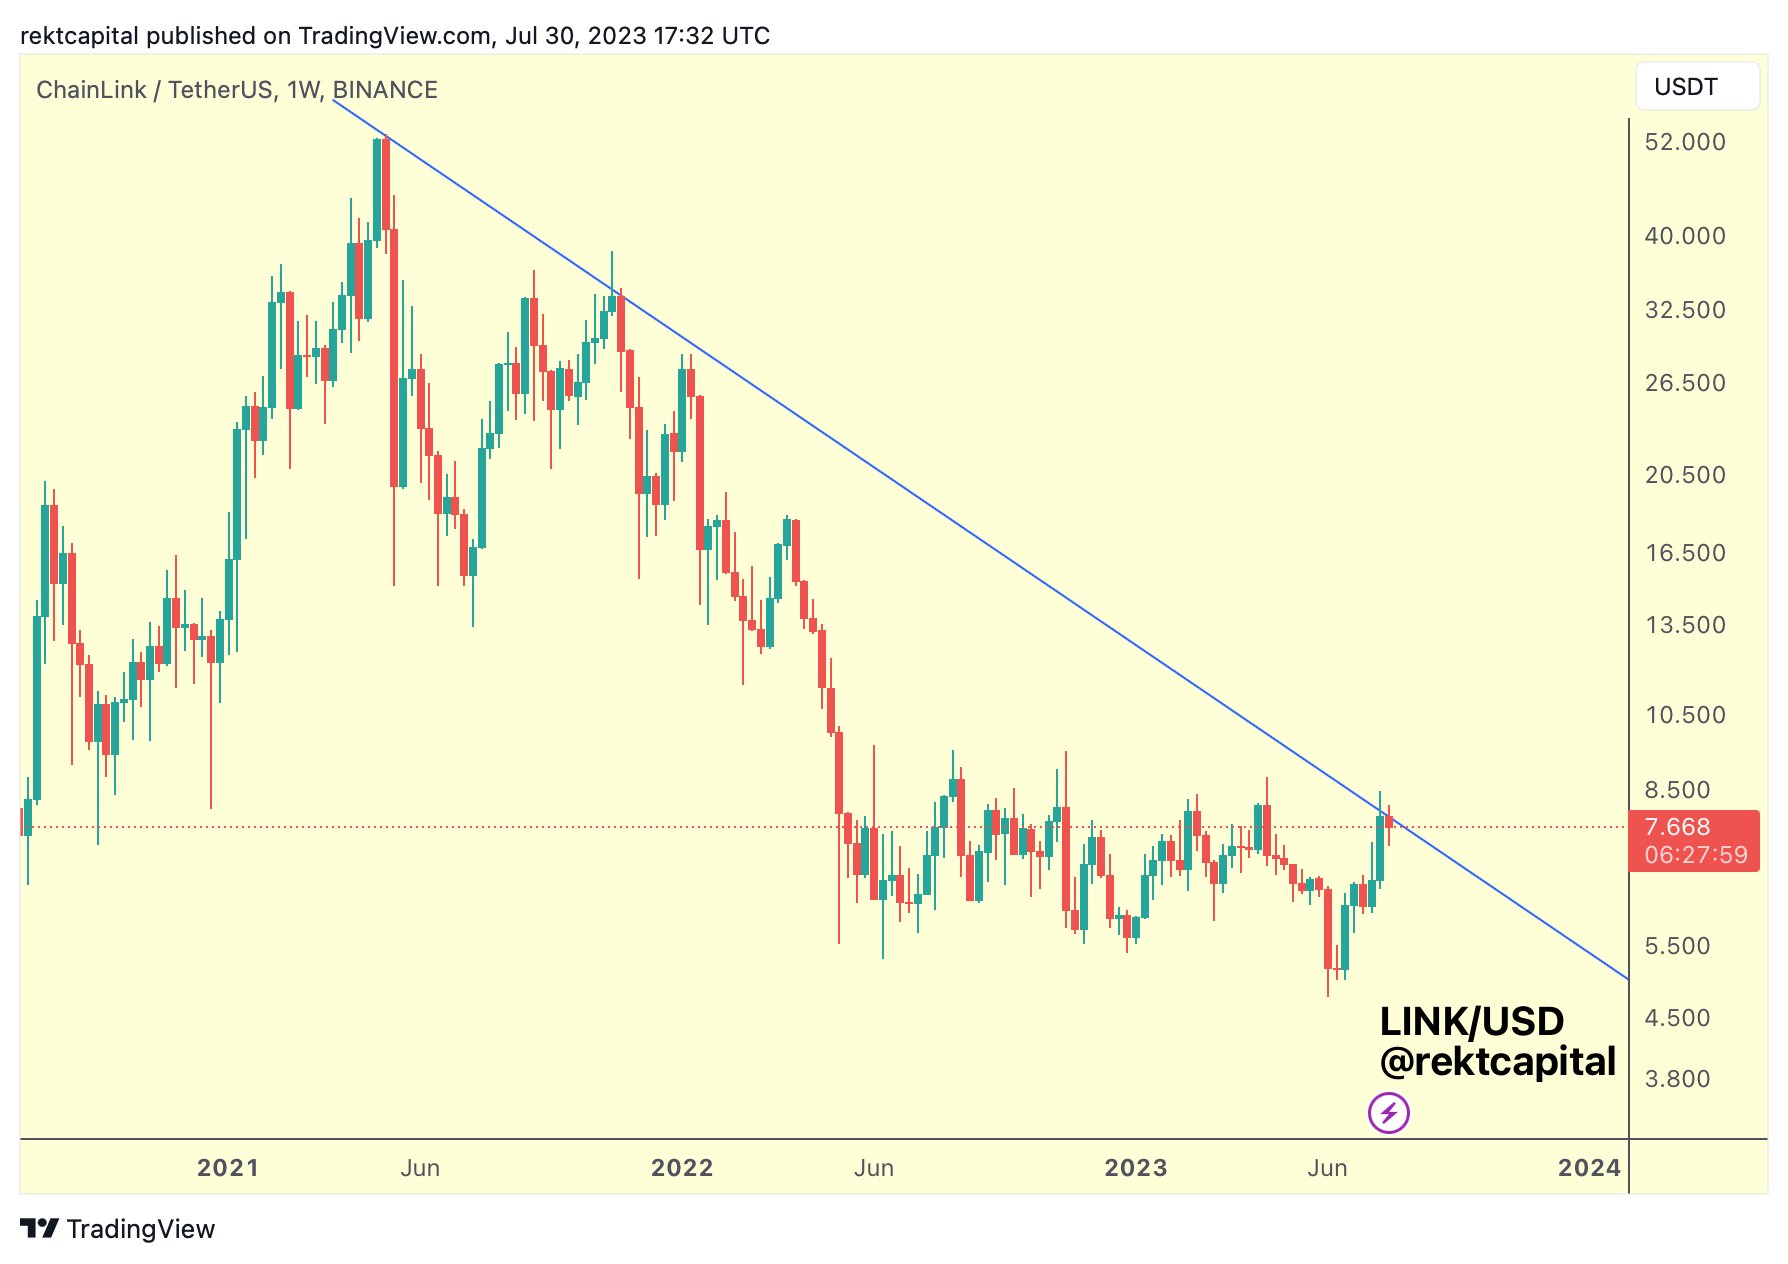  link analyst says chainlink weekly close seeing 